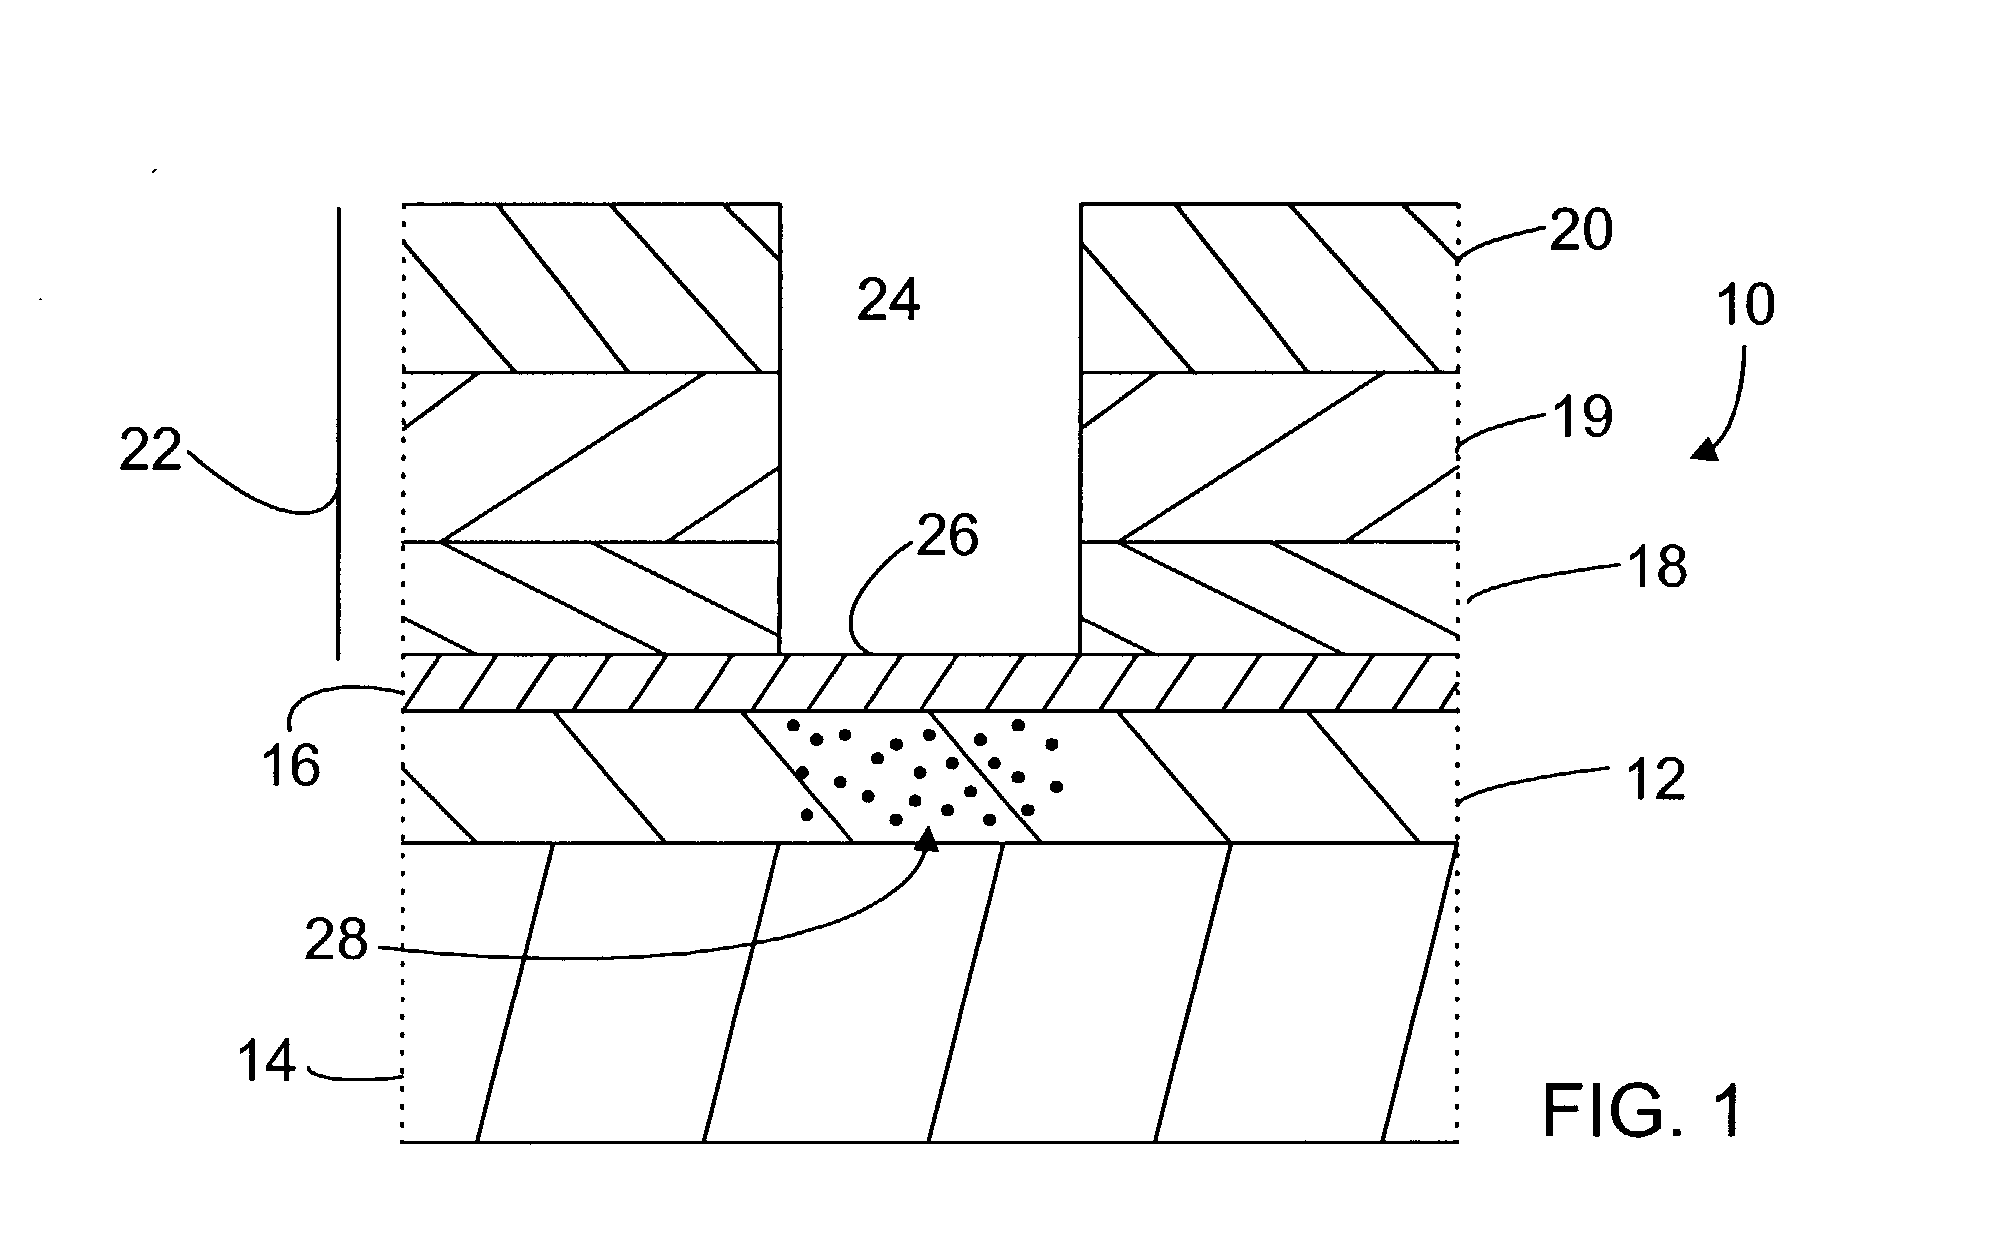 Emitter with dielectric layer having implanted conducting centers